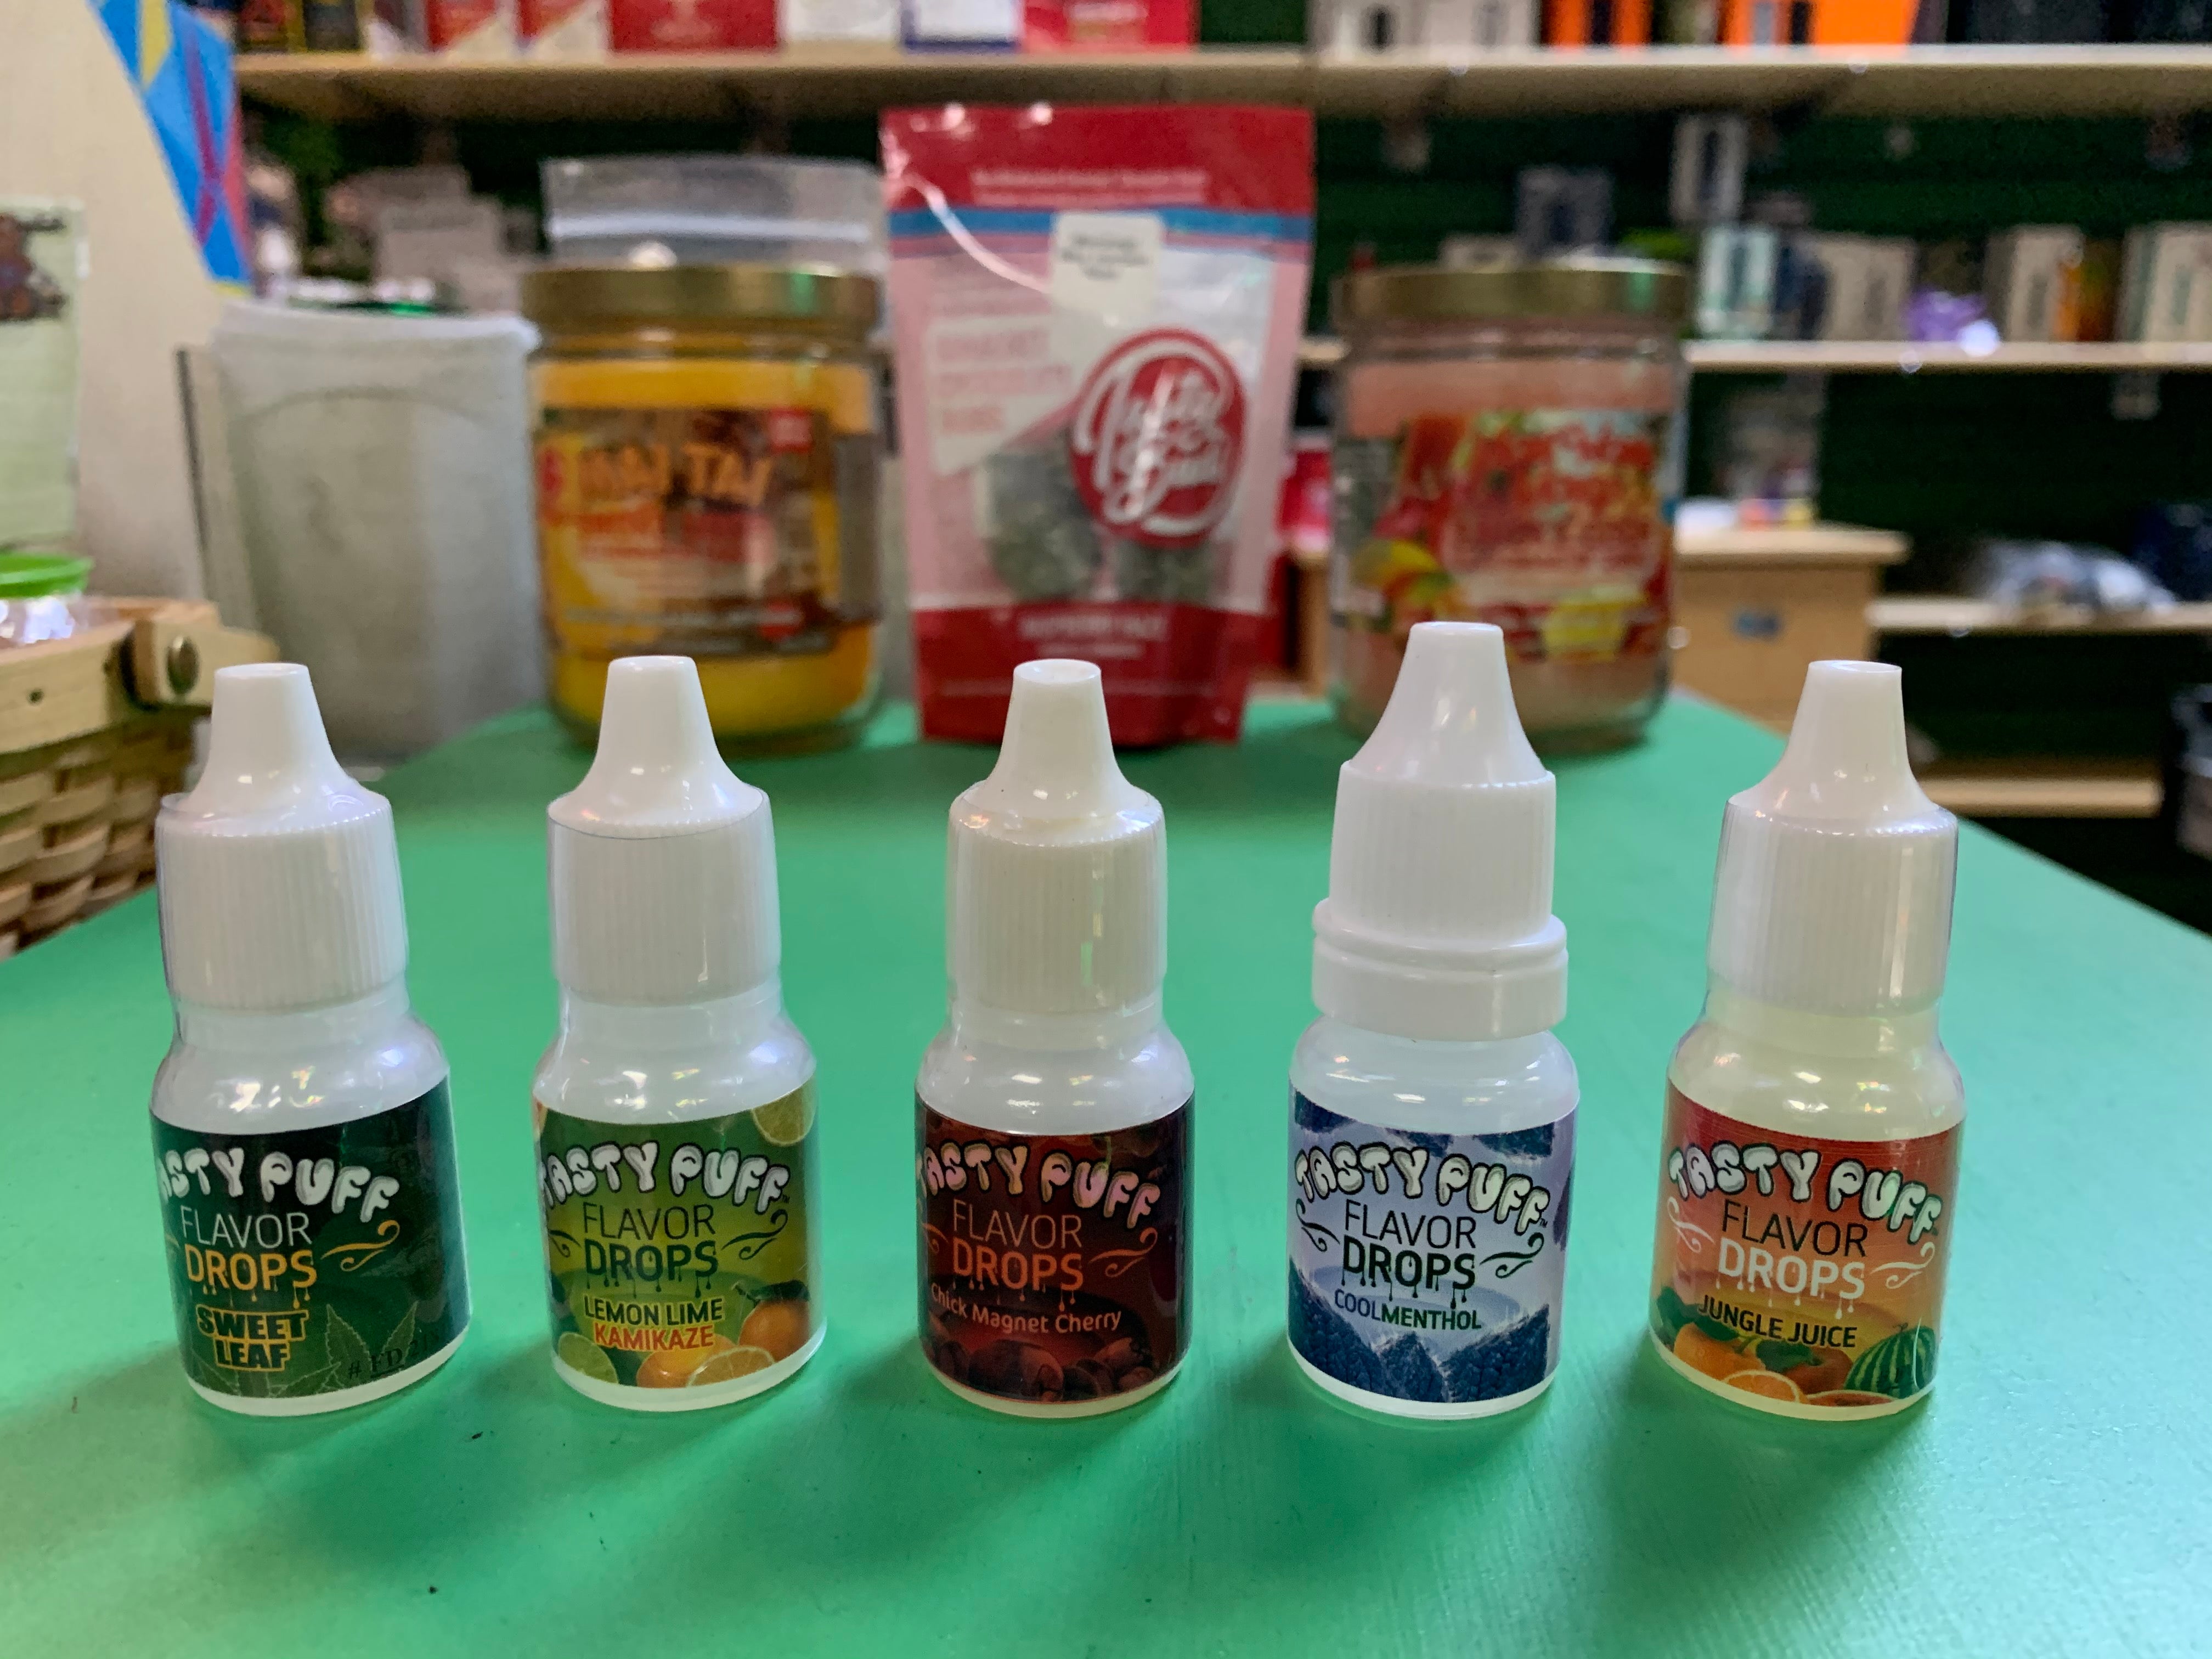 Tasty Puff Cannabis Flavouring Shell Shock